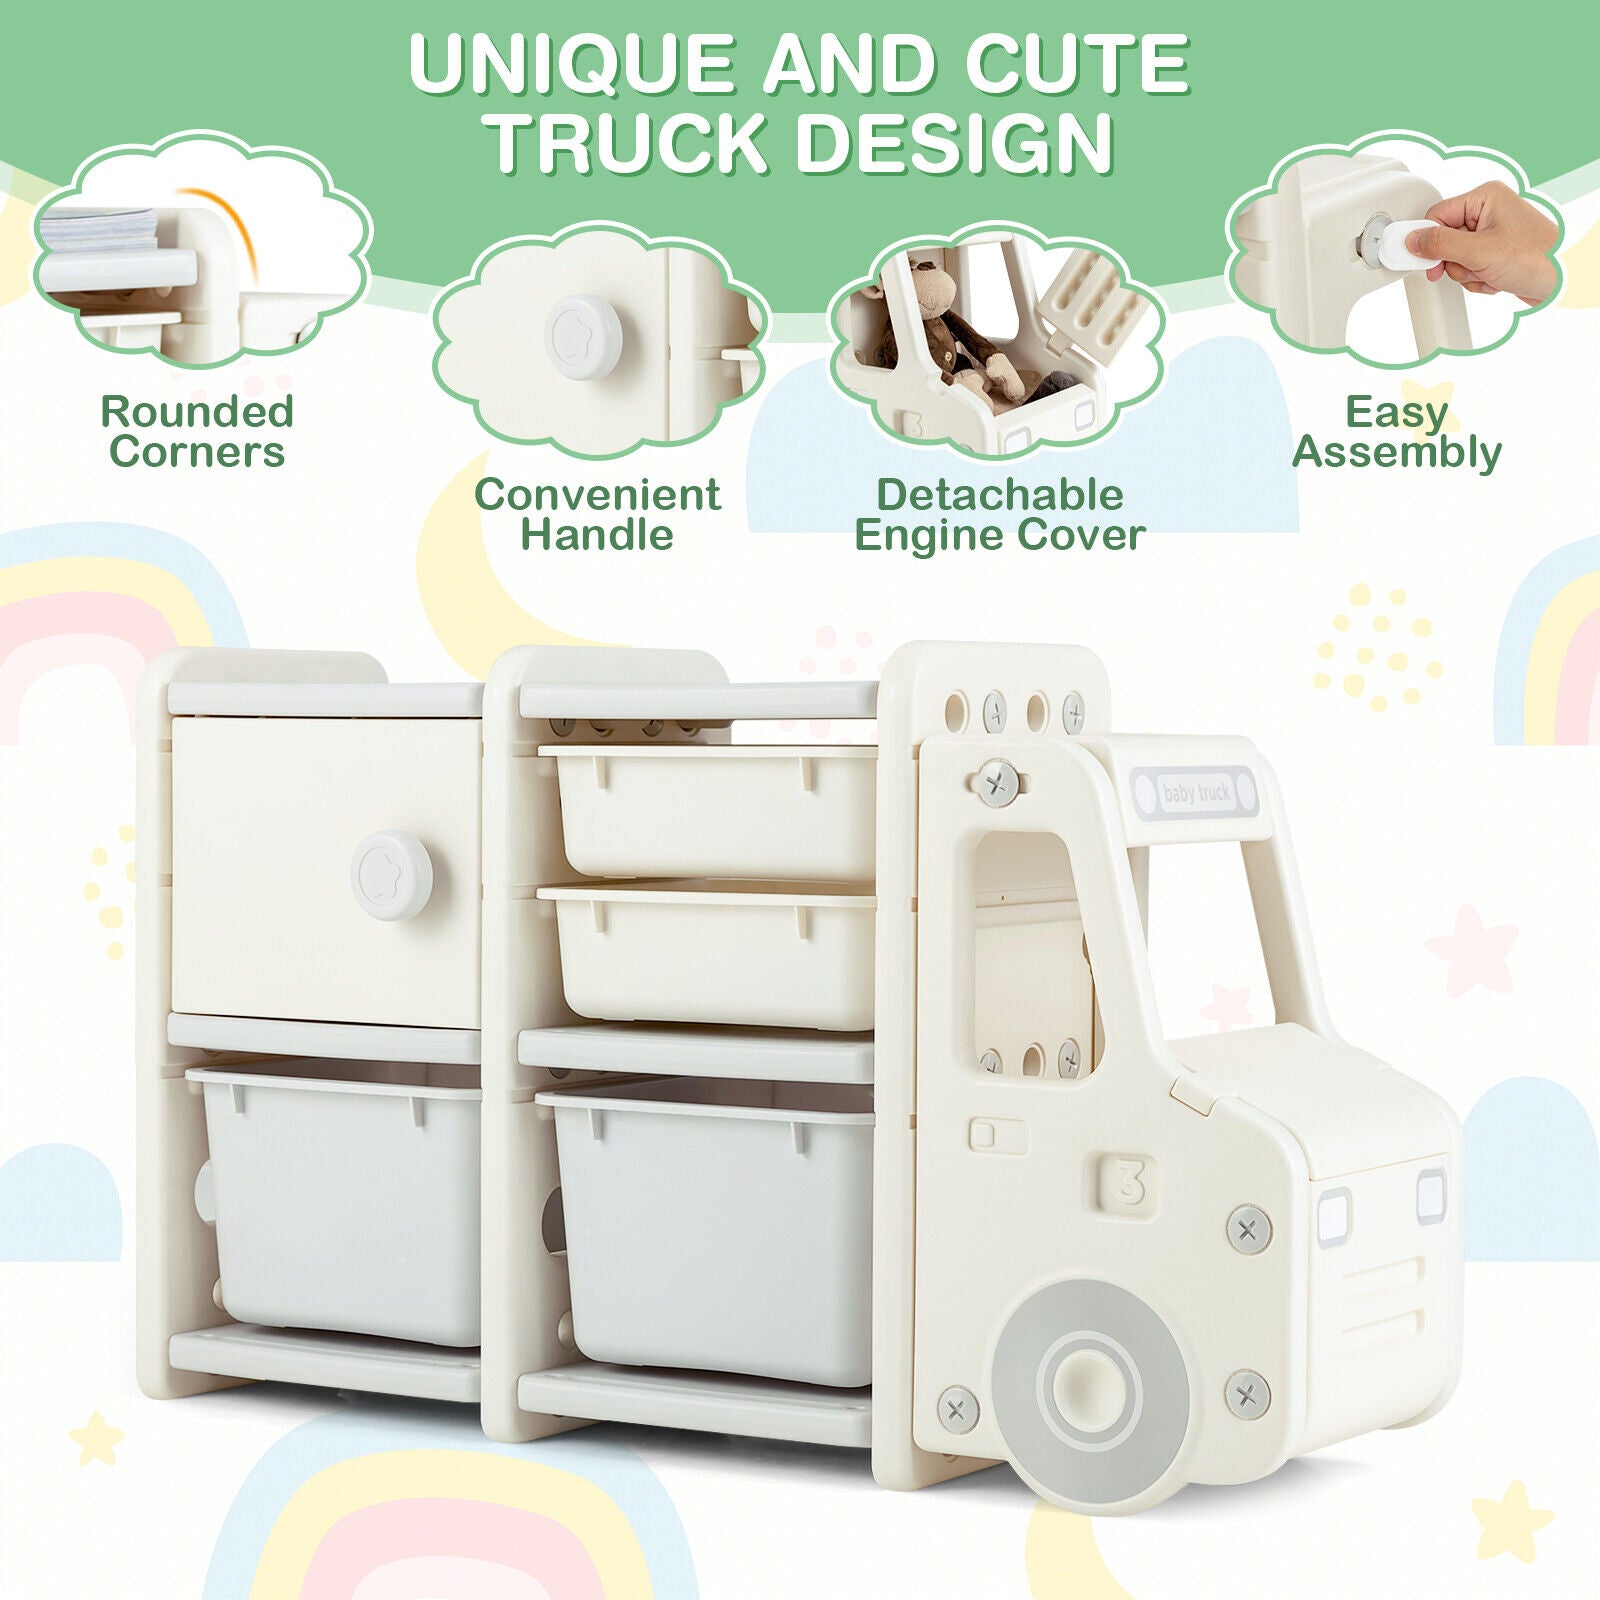 Easy Assembly: The baby truck organizer is easy to assemble with its convenient interlocking design and nut fixation. The package includes an Allen key and a screwdriver, enabling you to complete the assembly together with your little one. Additionally, the truck front can be mounted to the left or right as desired.